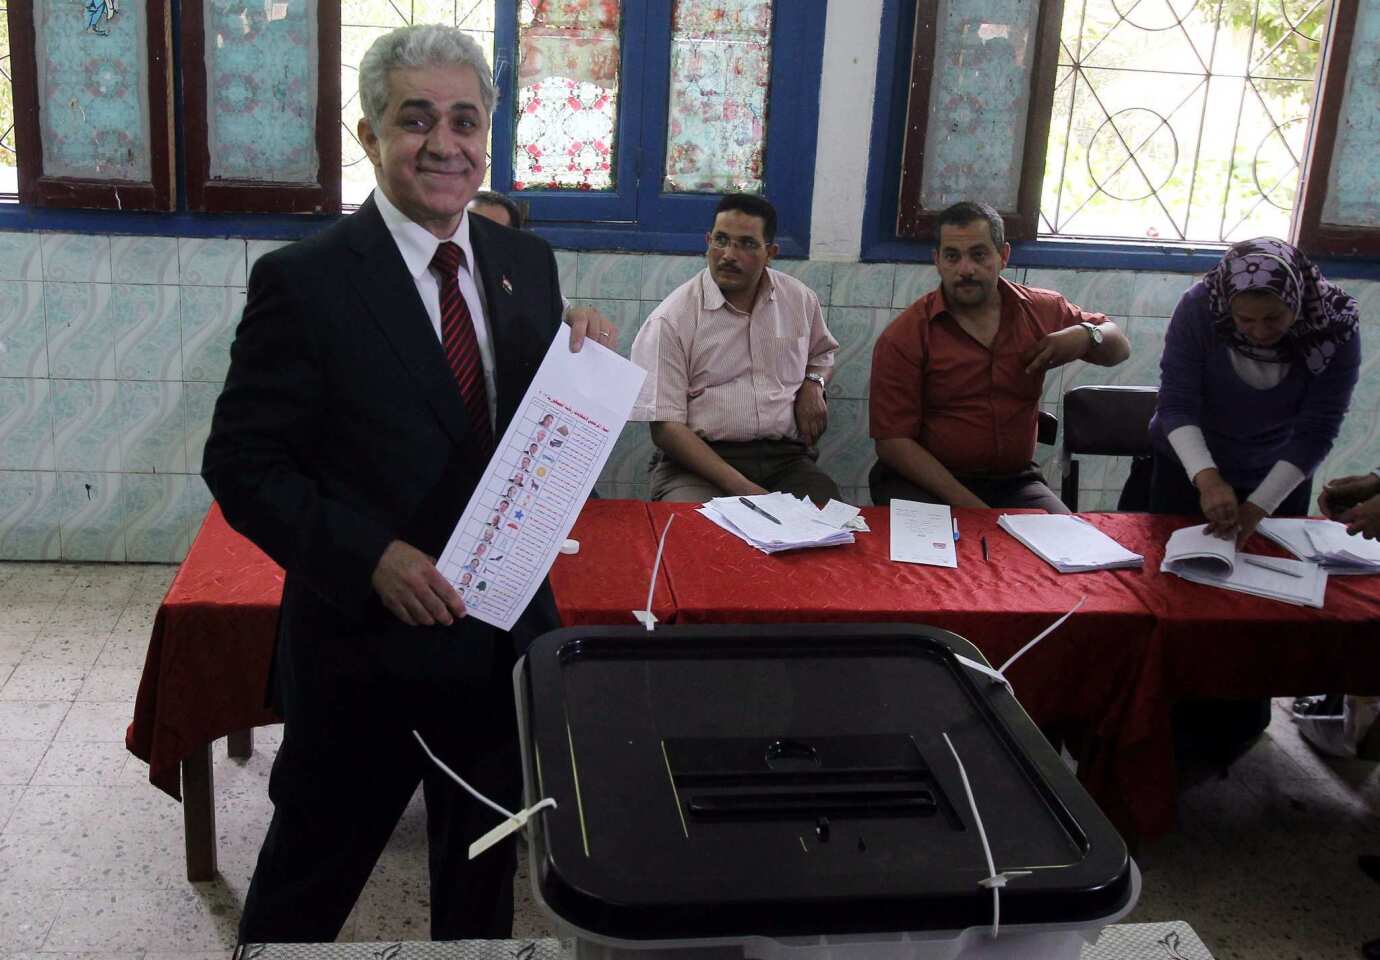 Egyptians vote in presidential elections